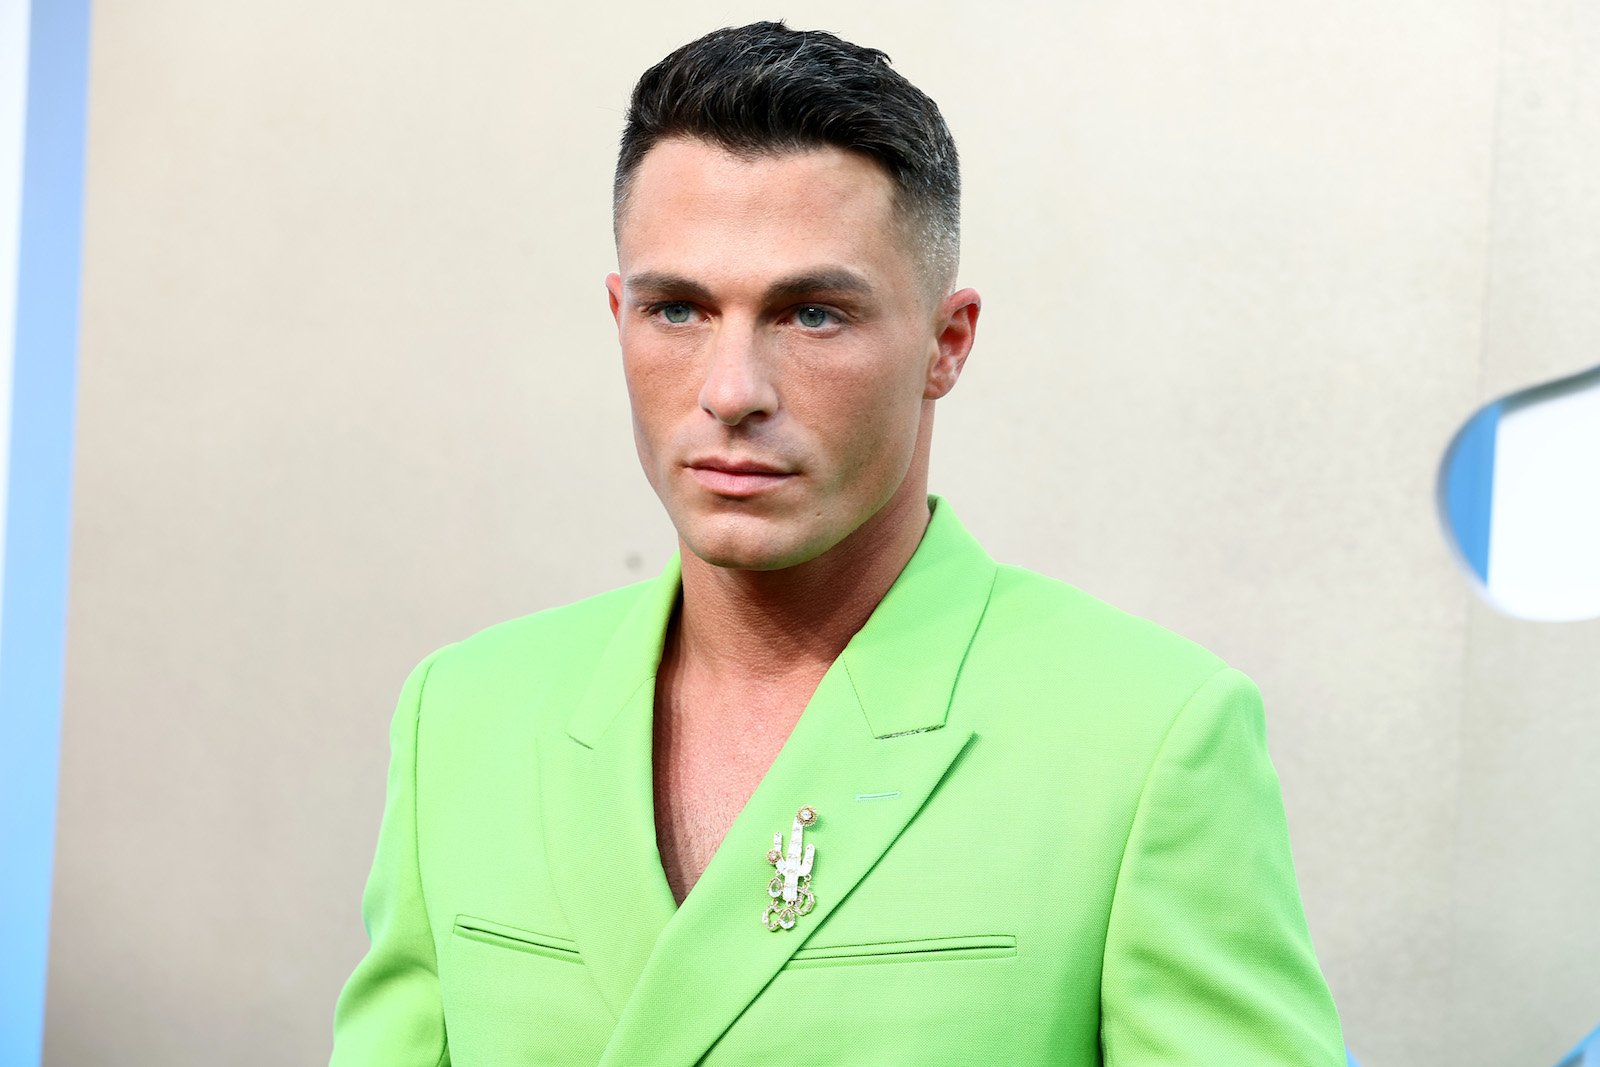 Colton Haynes from MTV's 'Teen Wolf' hit the red carpet at the VMS.